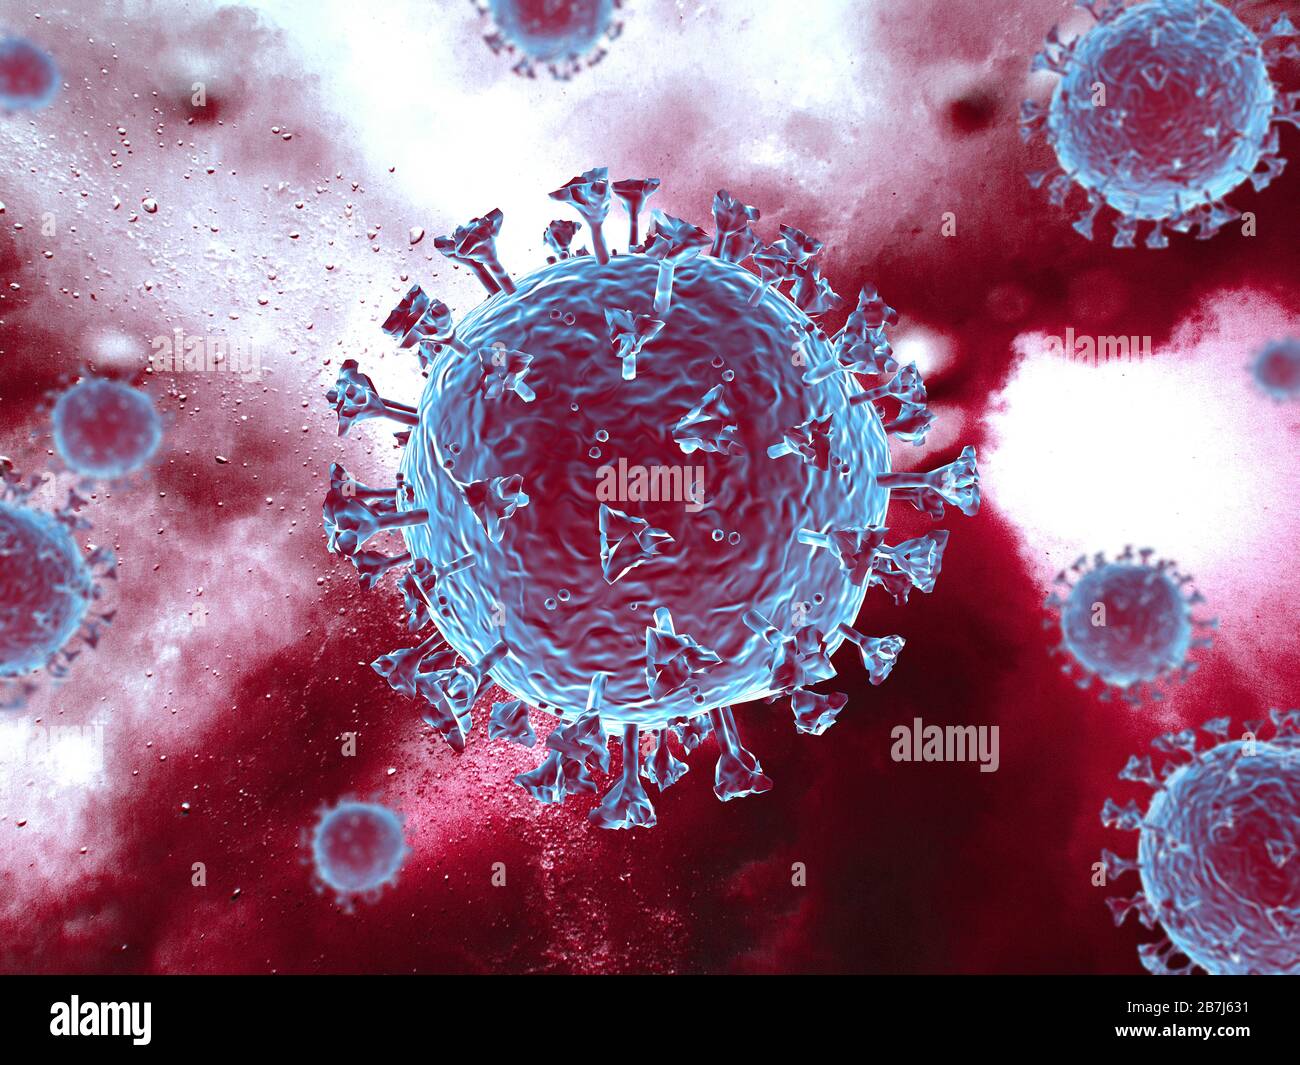 Corona virus scene with detailed structure. Blue/red subjects On red background. 3d rendering. Stock Photo